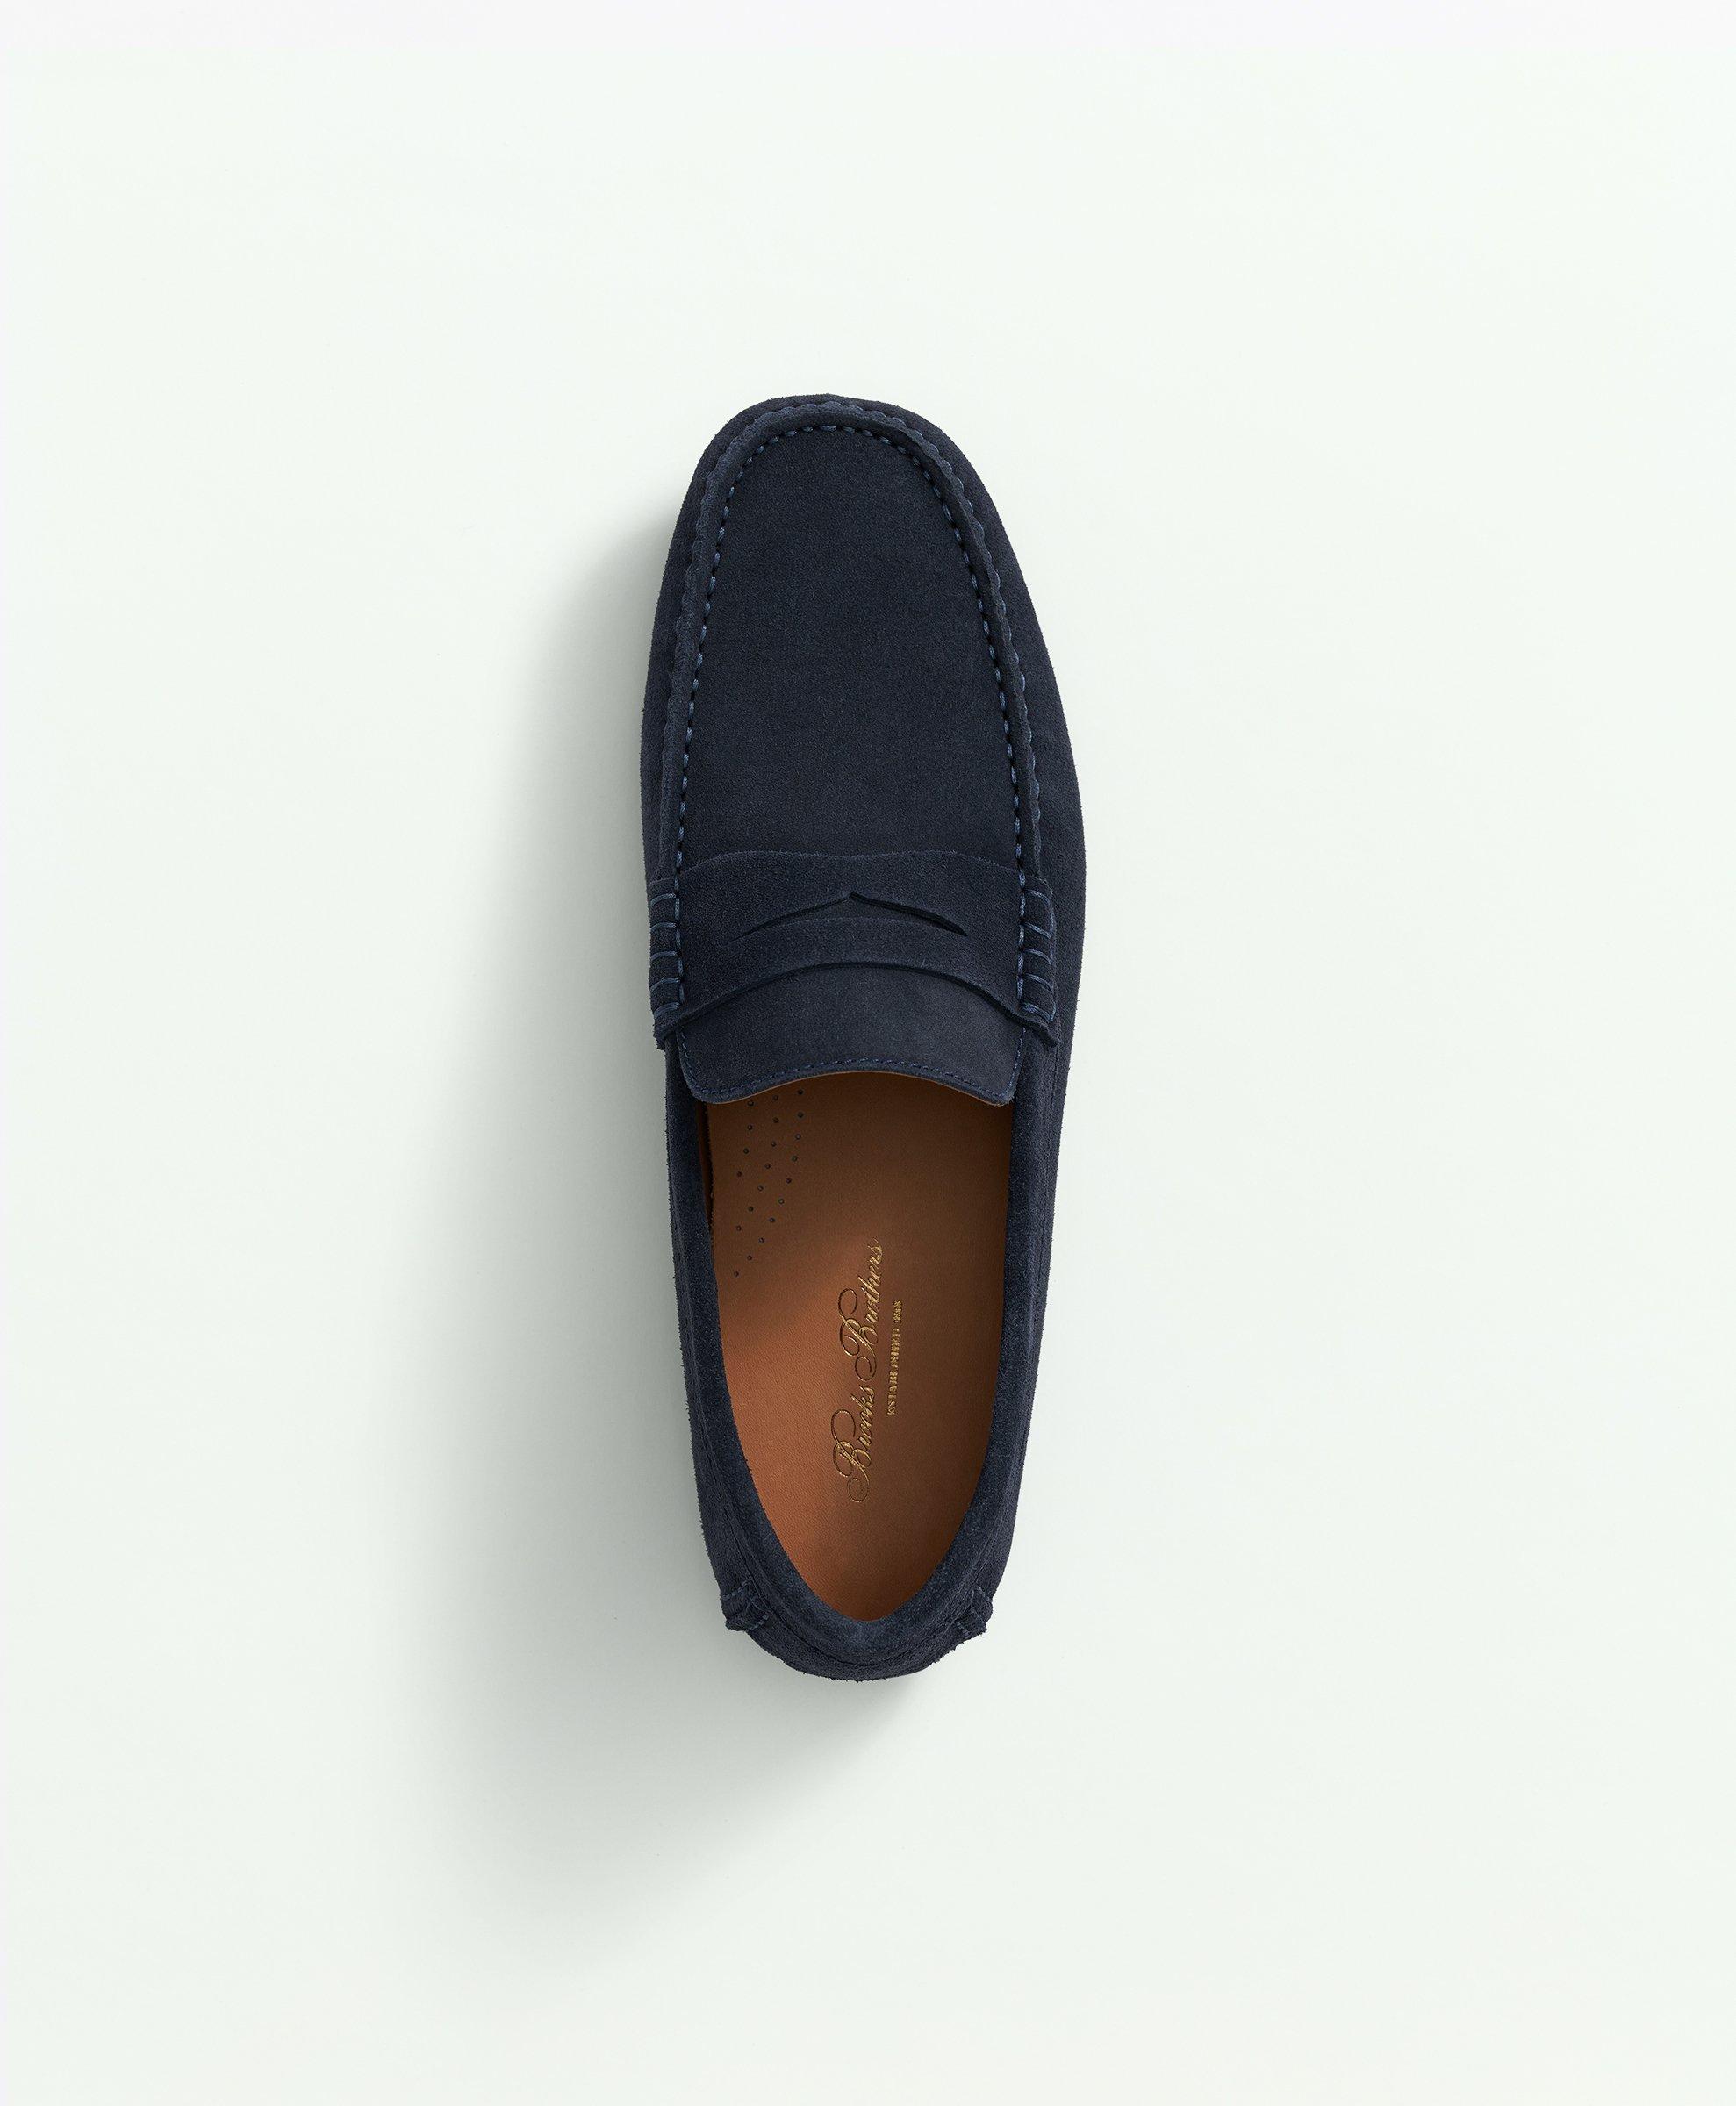 Shop Men's Shoes | Loafers, Boots, & Dress Shoes | Brooks Brothers